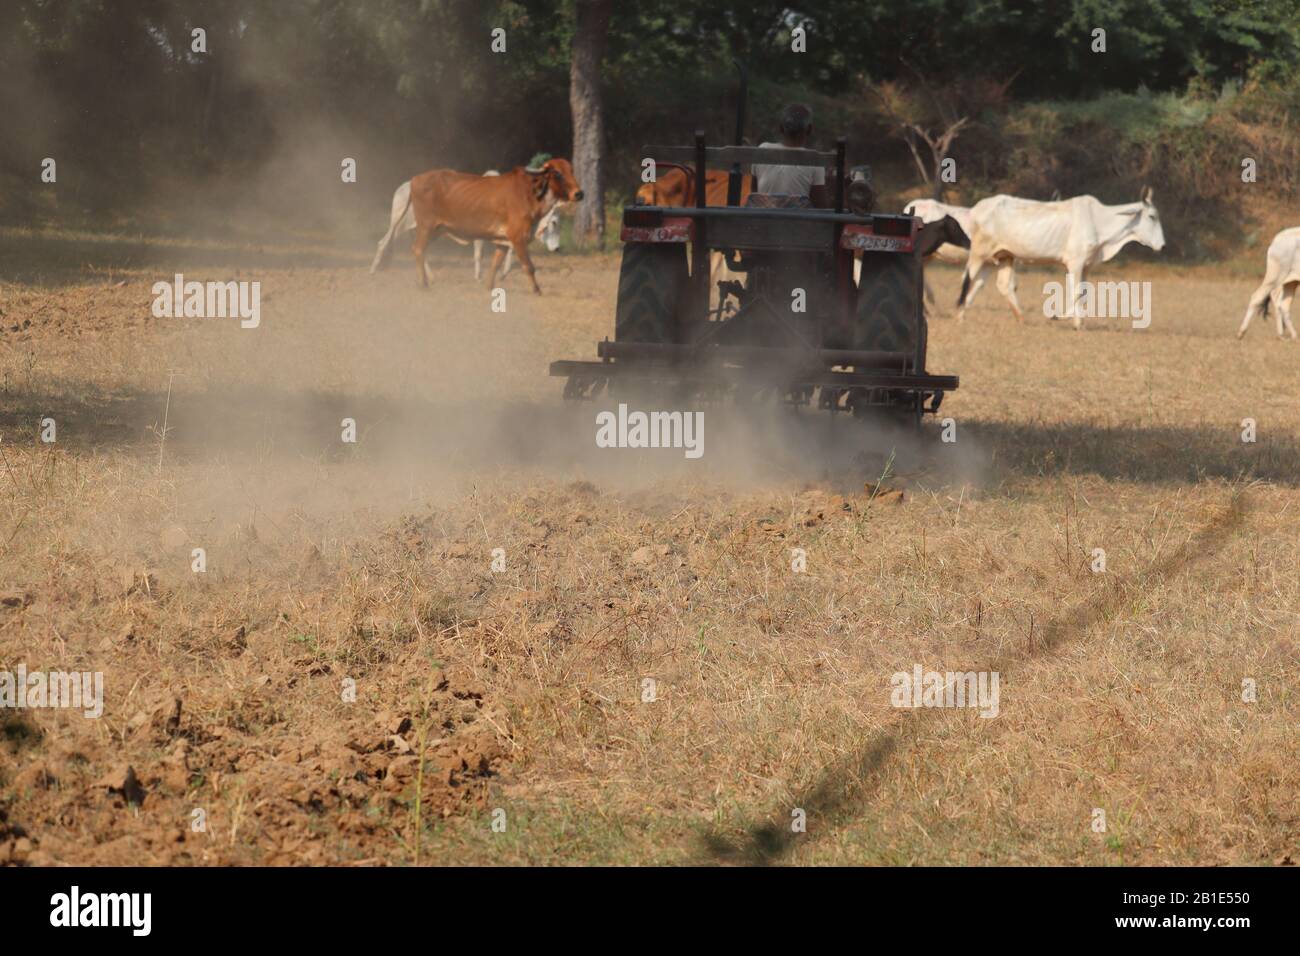 tractor cultivate on ground by farmer with The wind blows the sand in agriculture farm or field Stock Photo